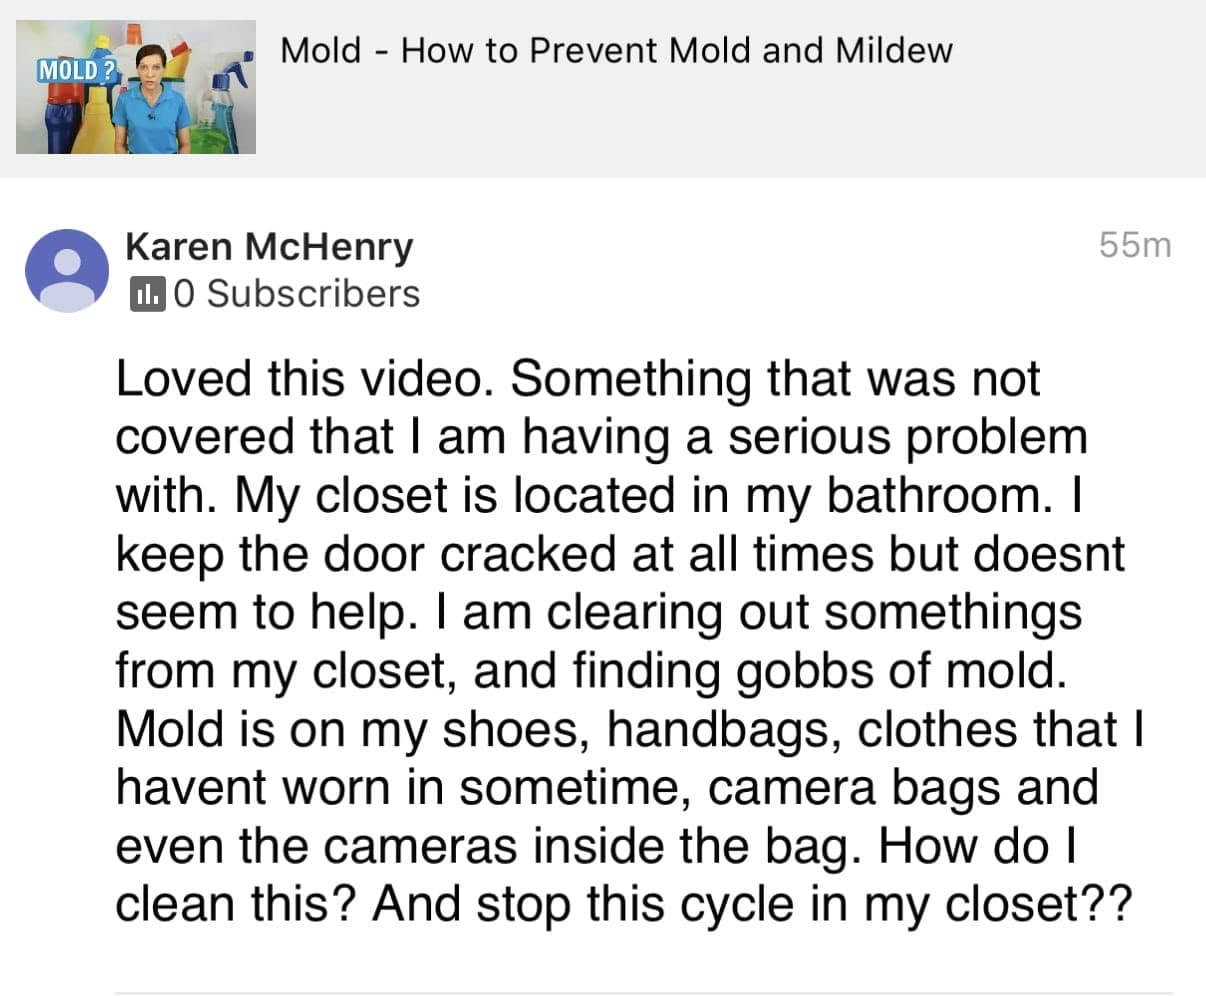 Loved this video, Ask a House Cleaner Testimonial